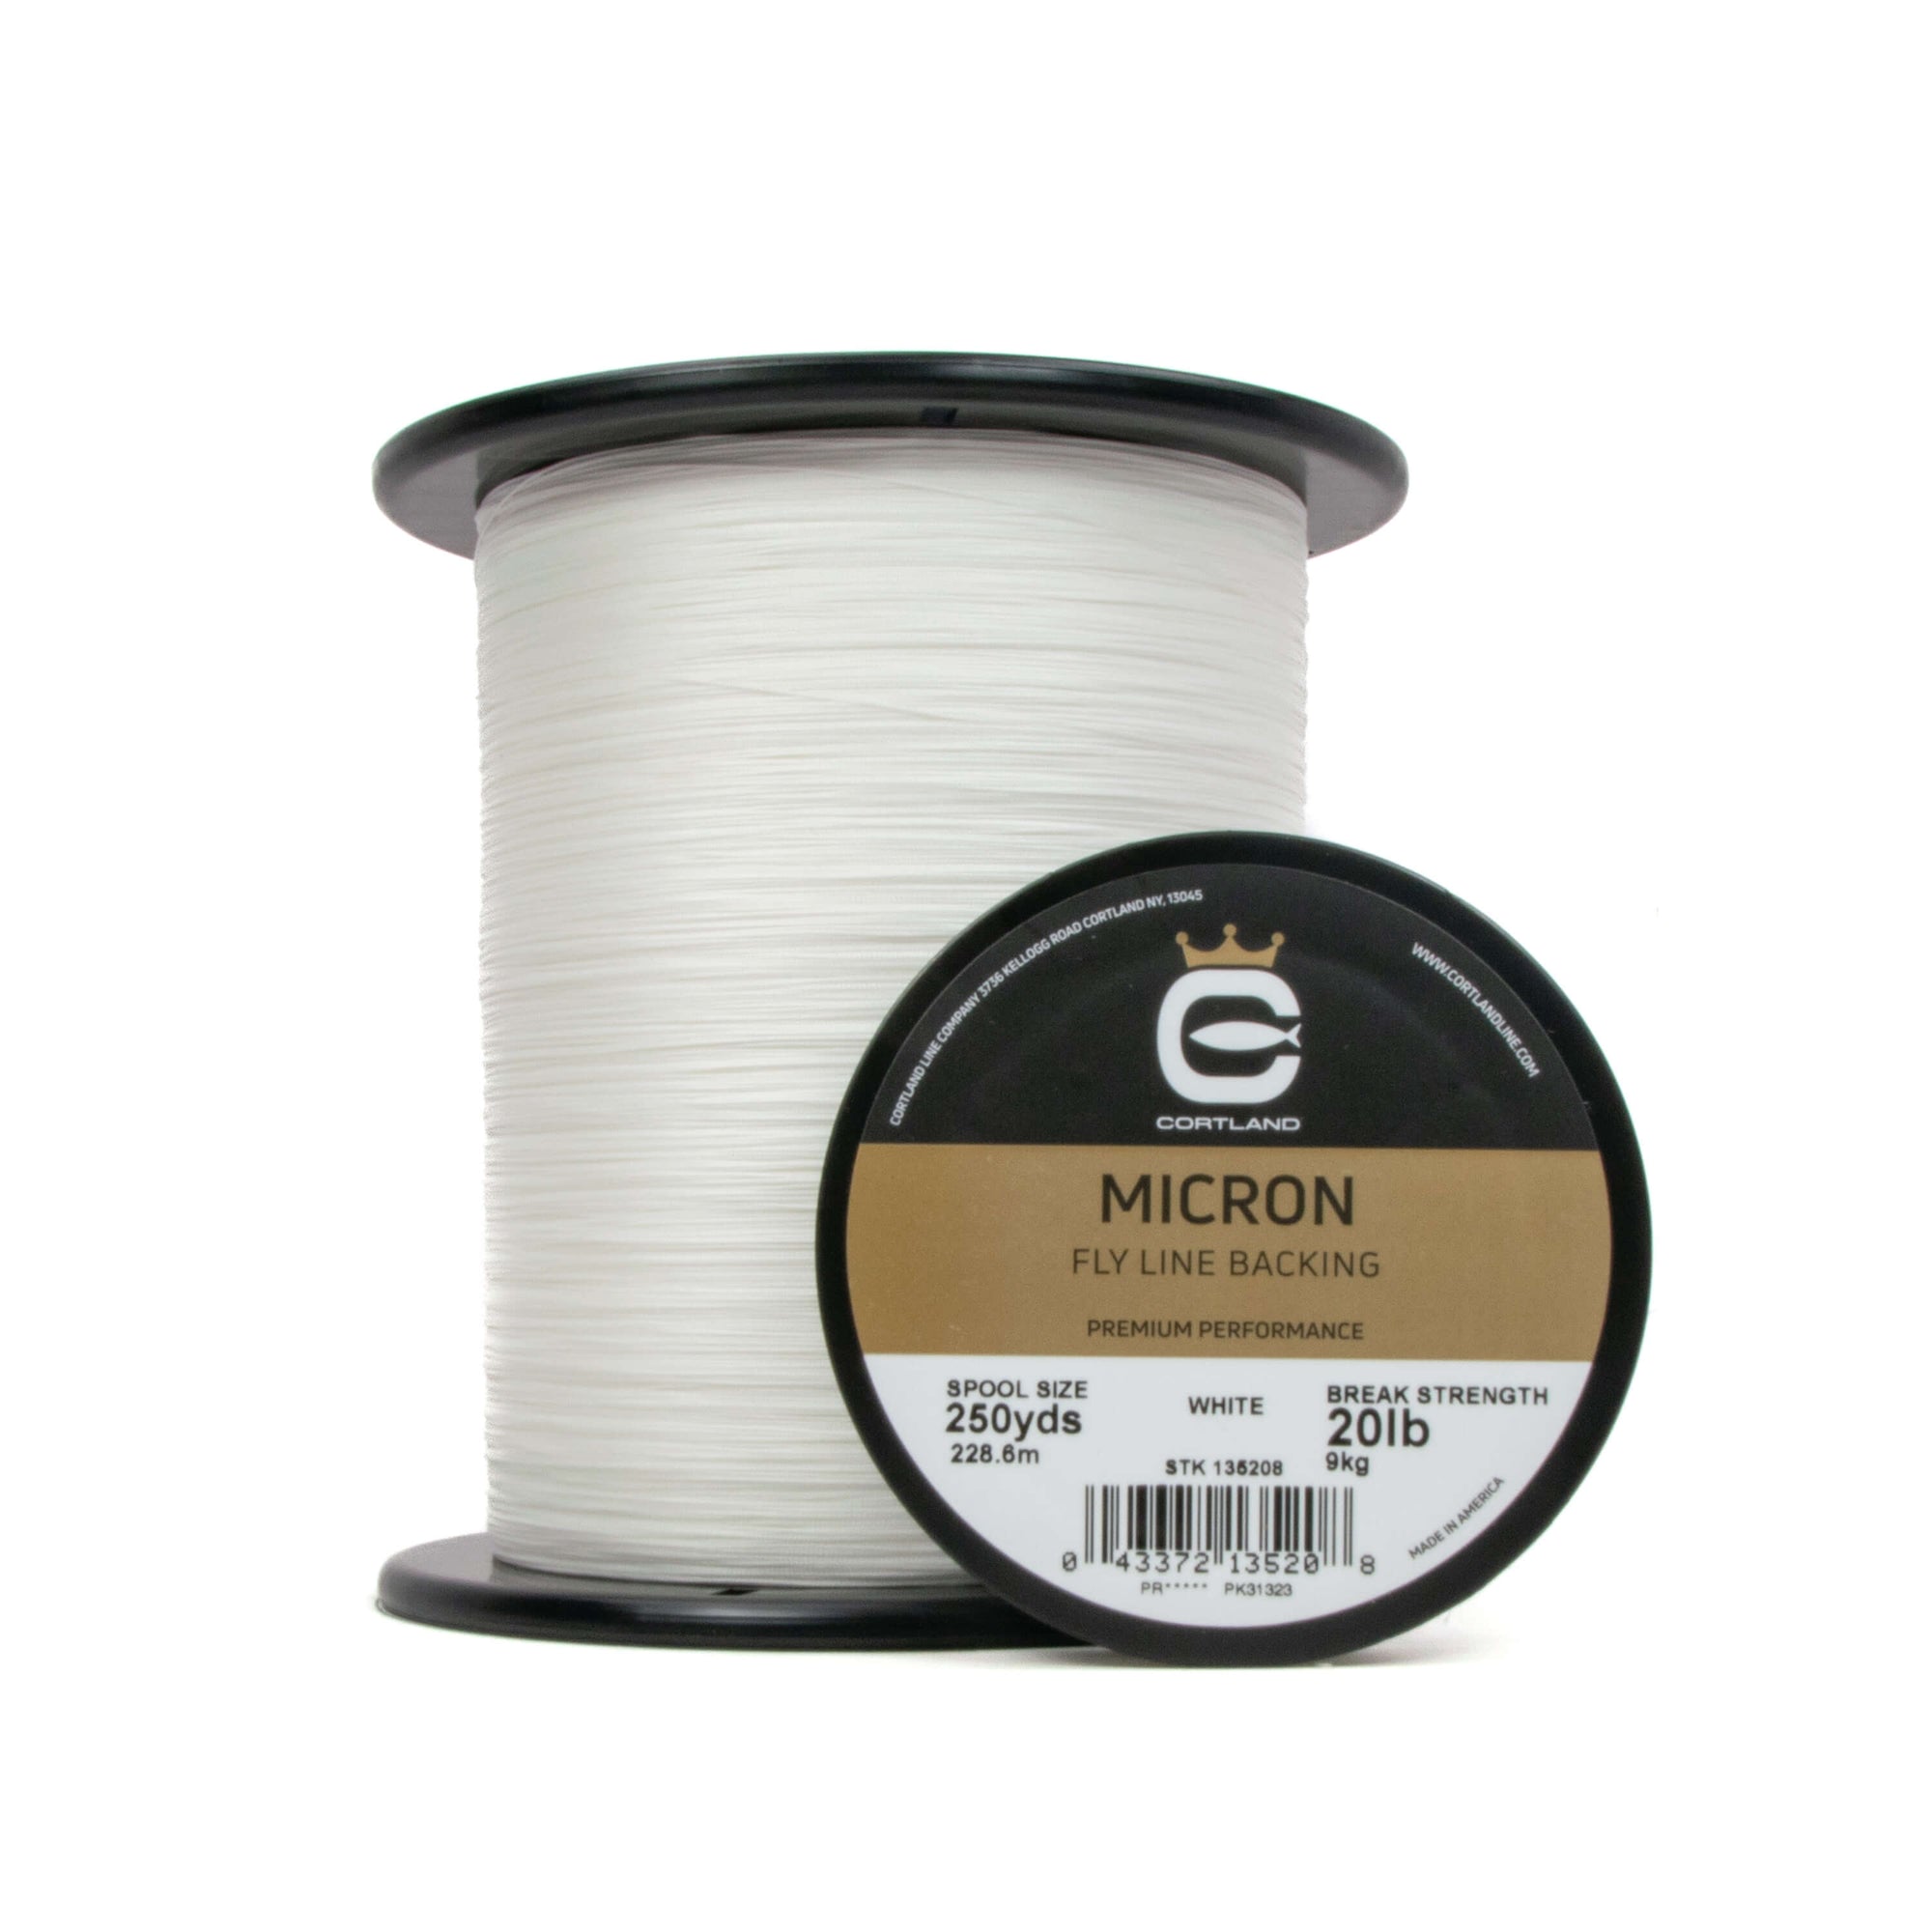 Various spool sizes of Micron Fly Line Backing - White